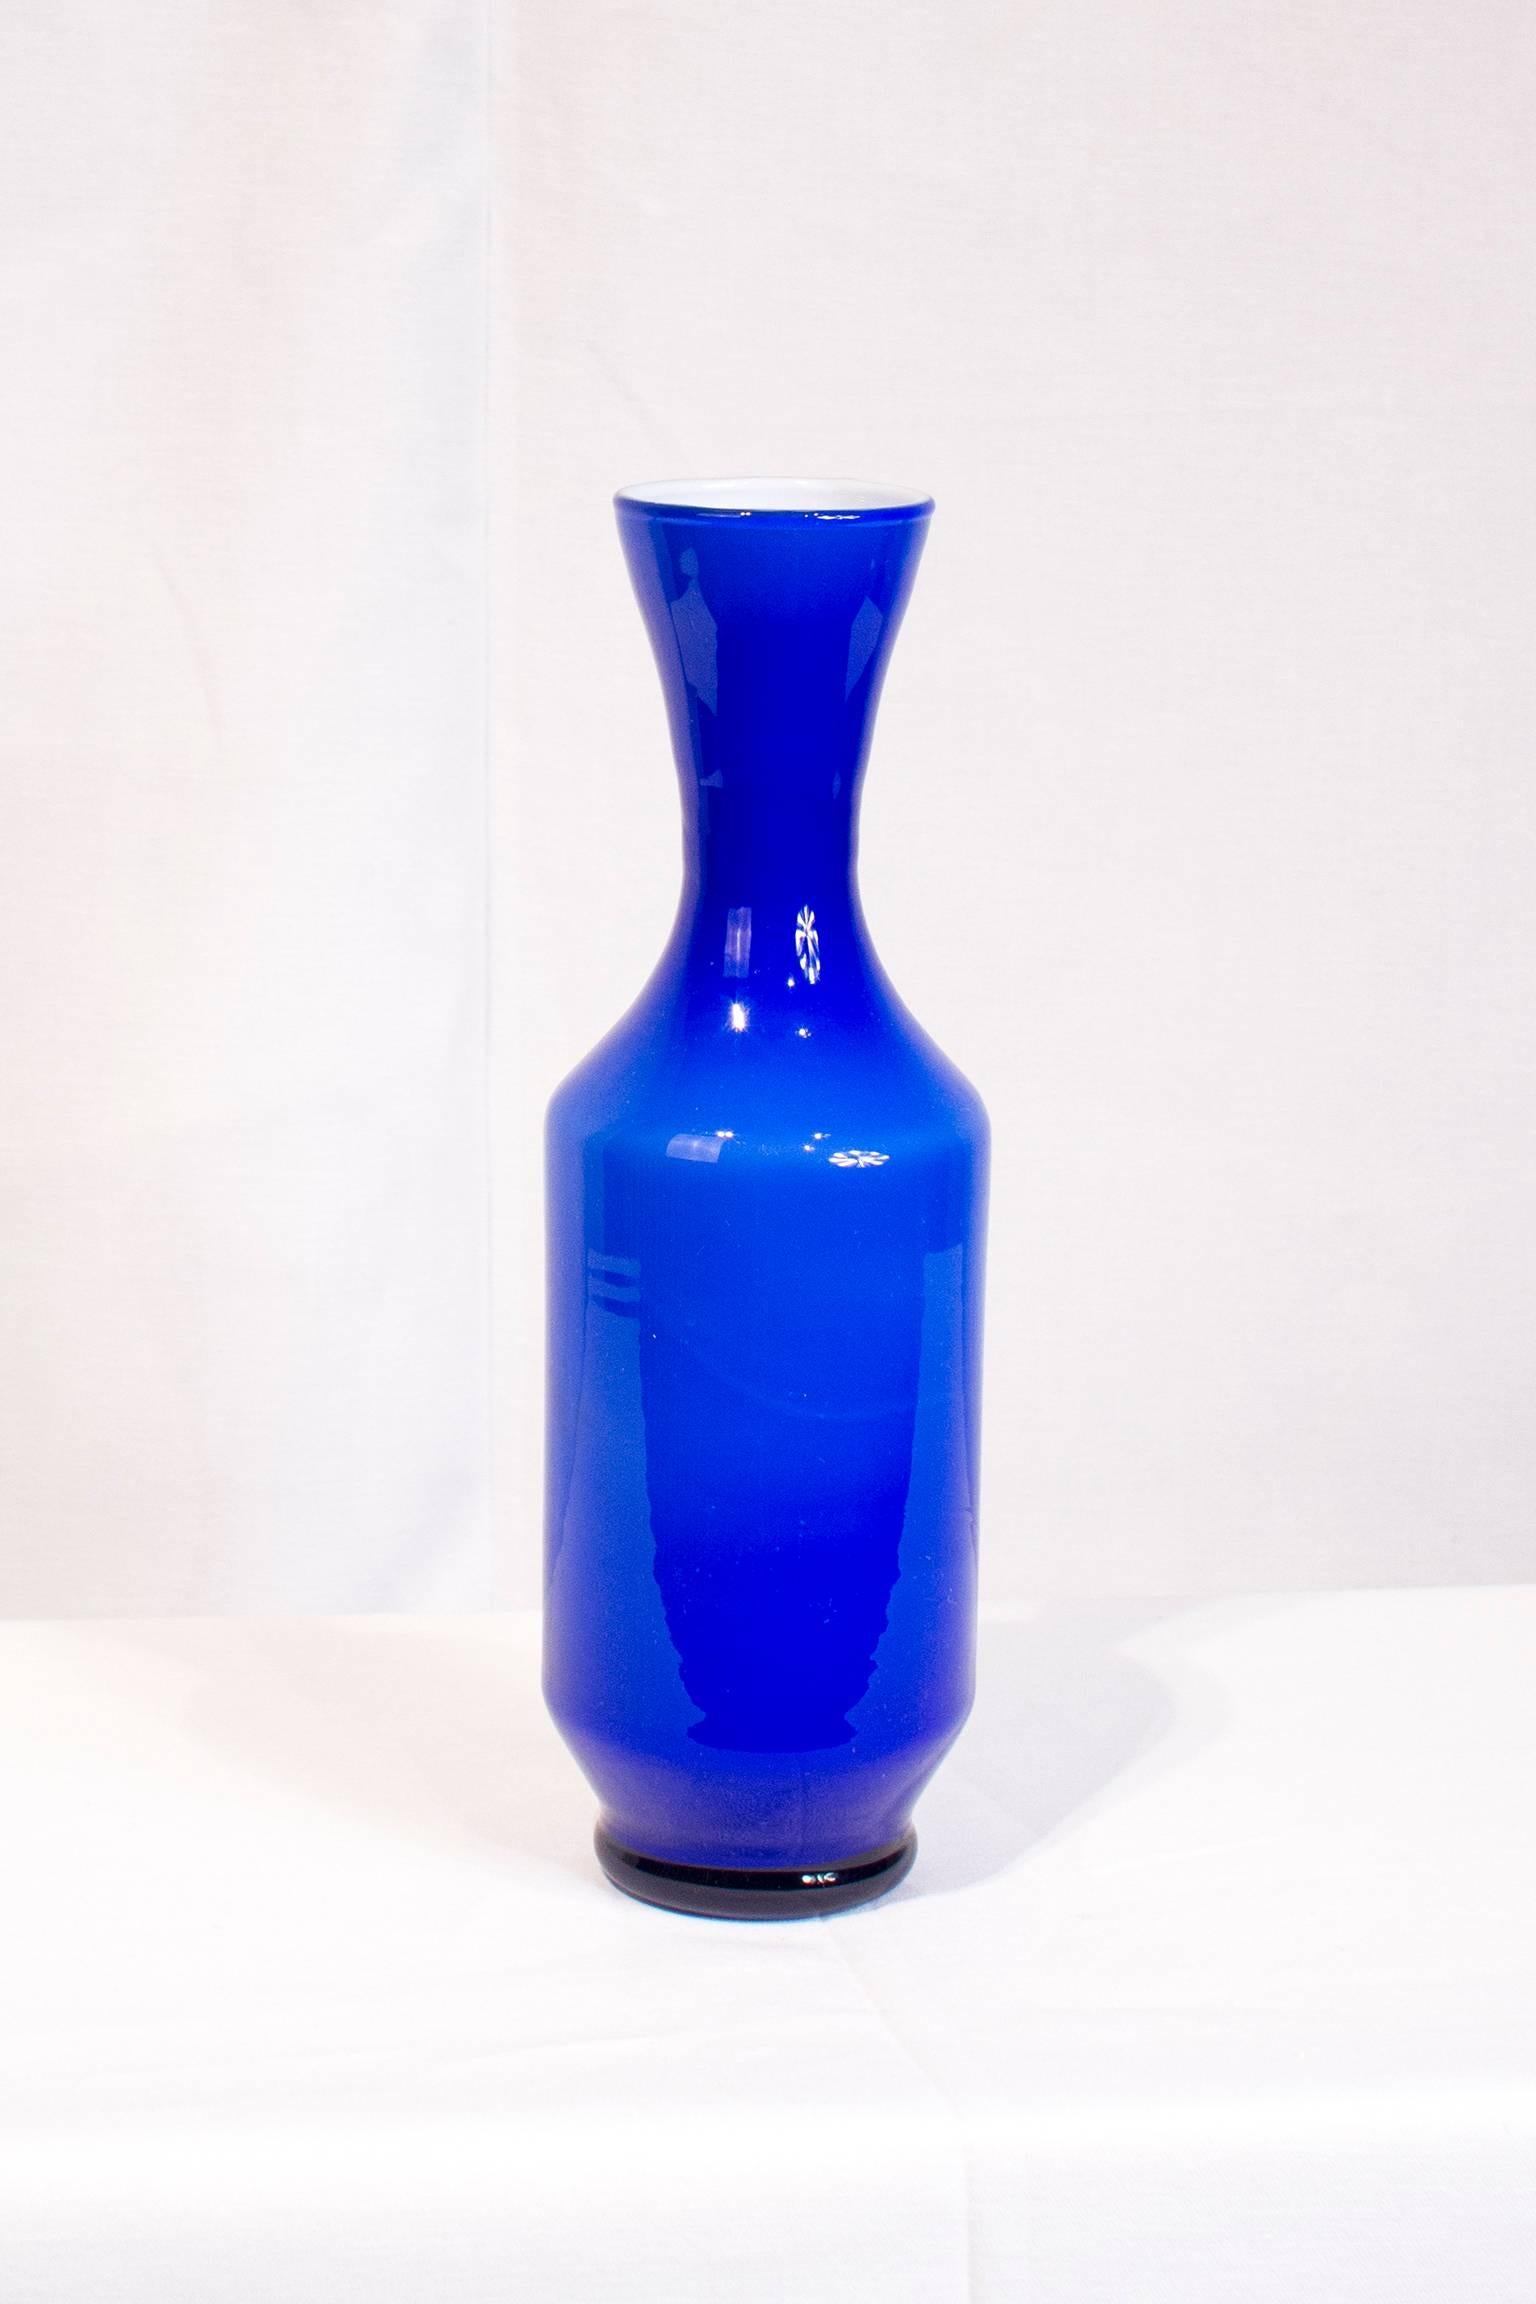 Empoli Art Glass Vases In Excellent Condition For Sale In Brussels, Brussels